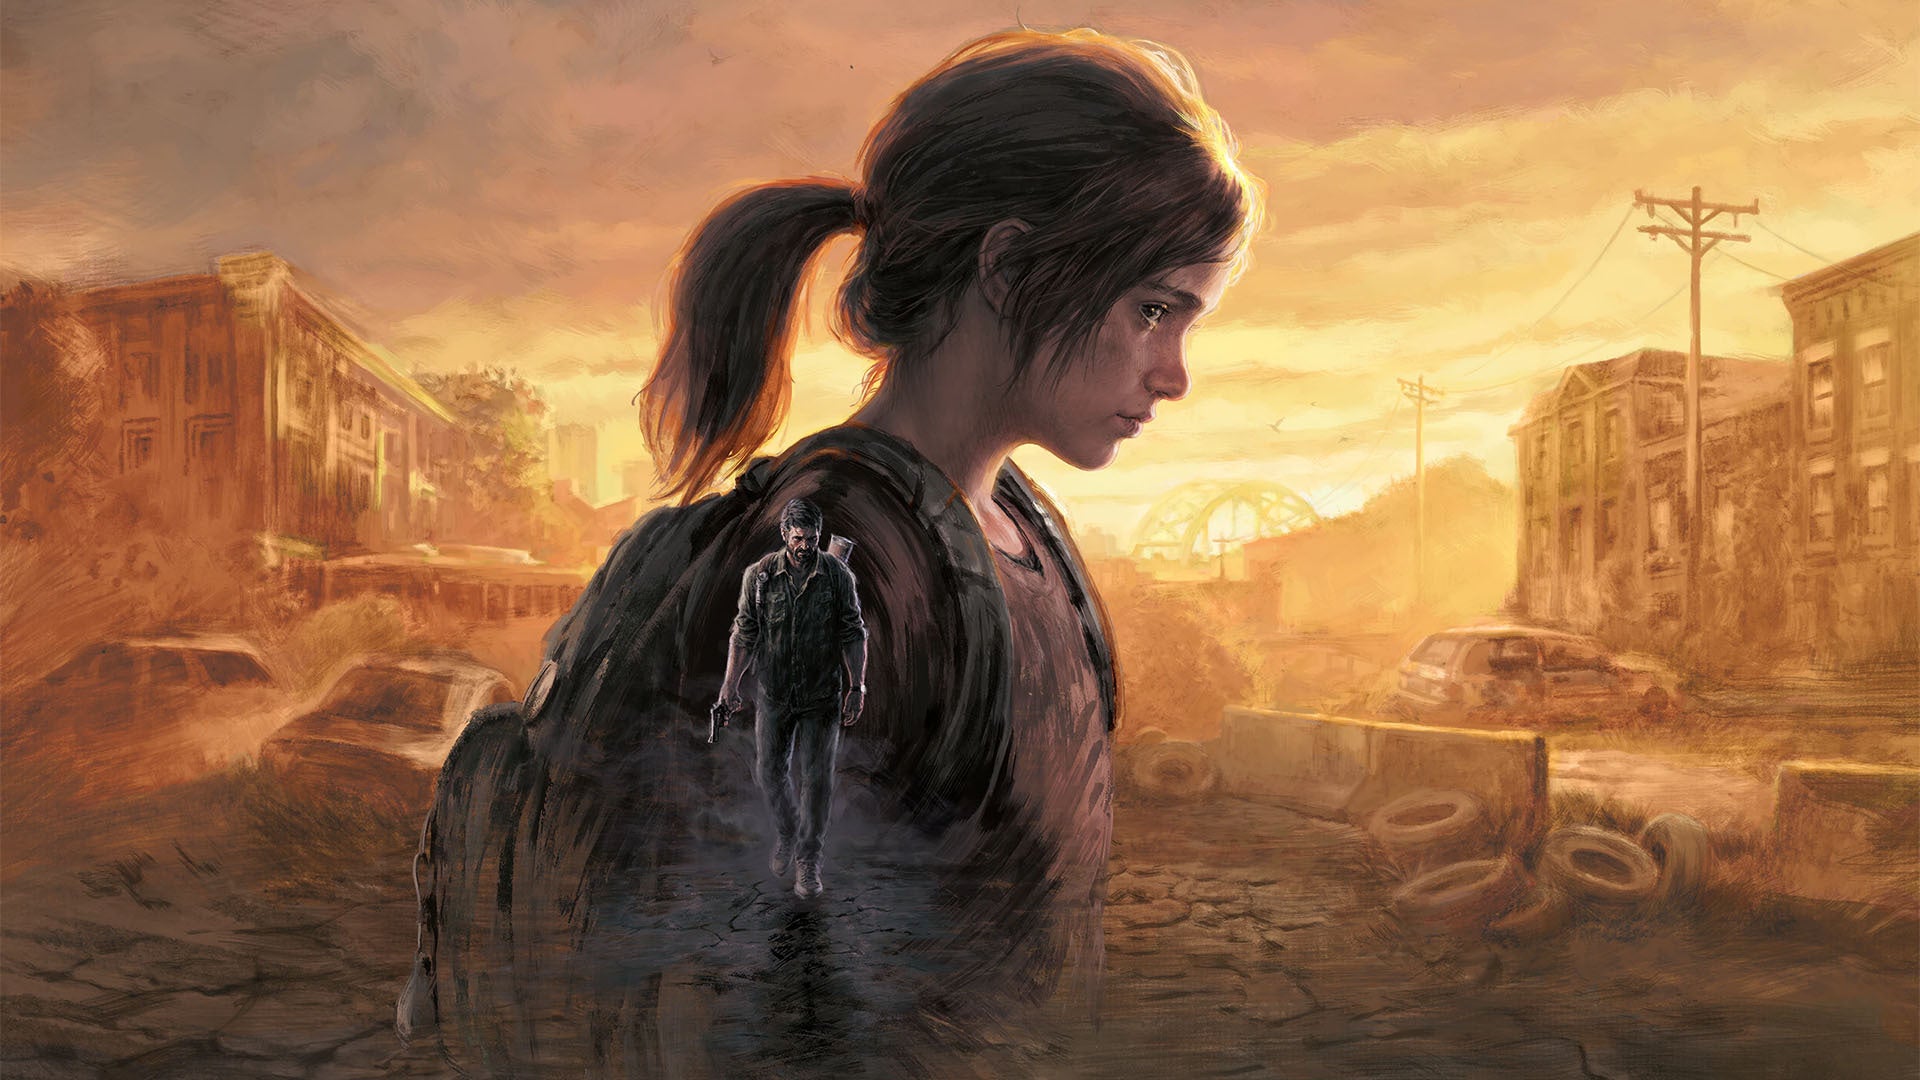 the last of us part one key art, featuring ellie